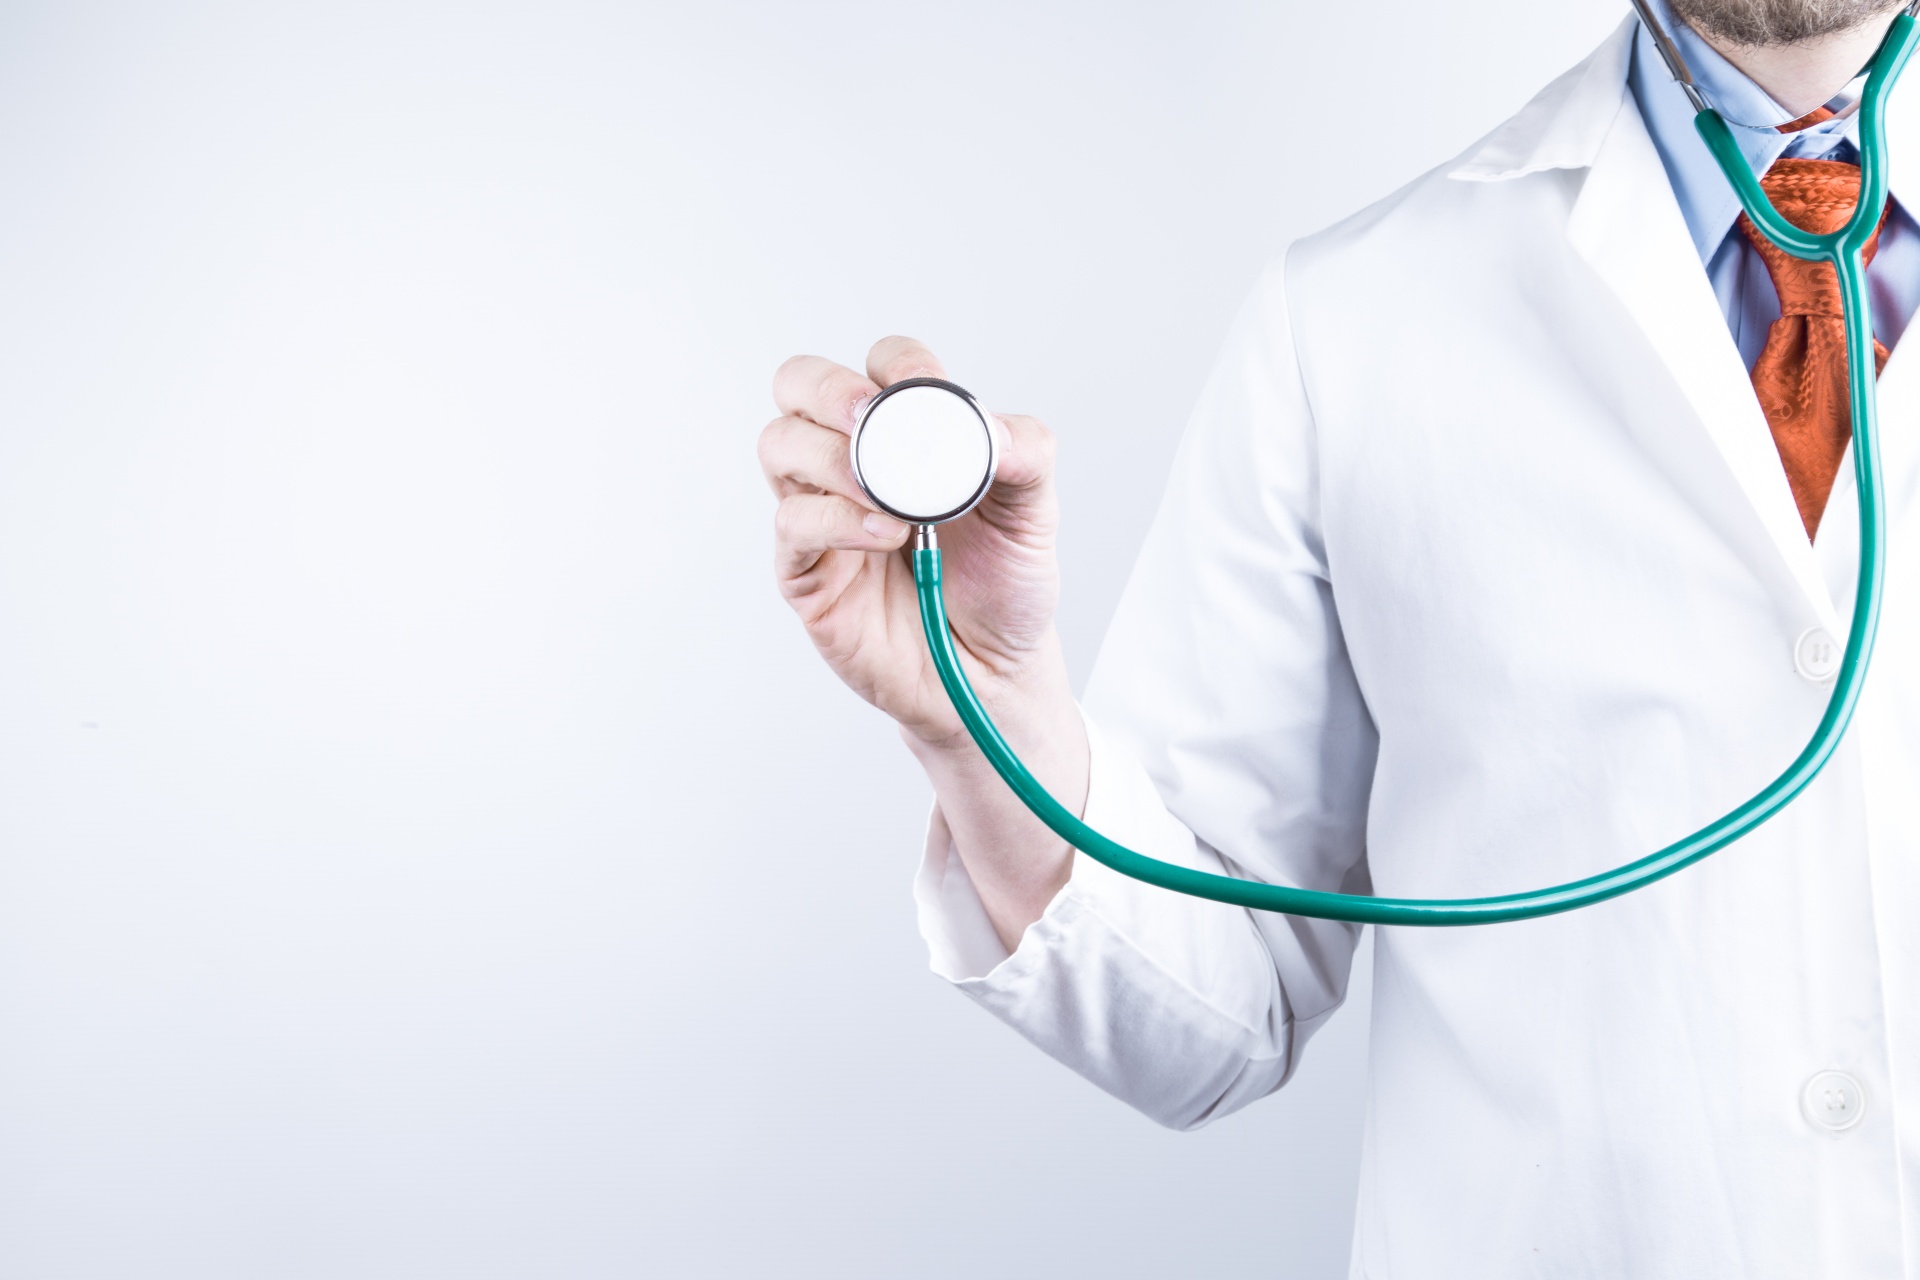 Doctor Free Stock Photo - Public Domain Pictures